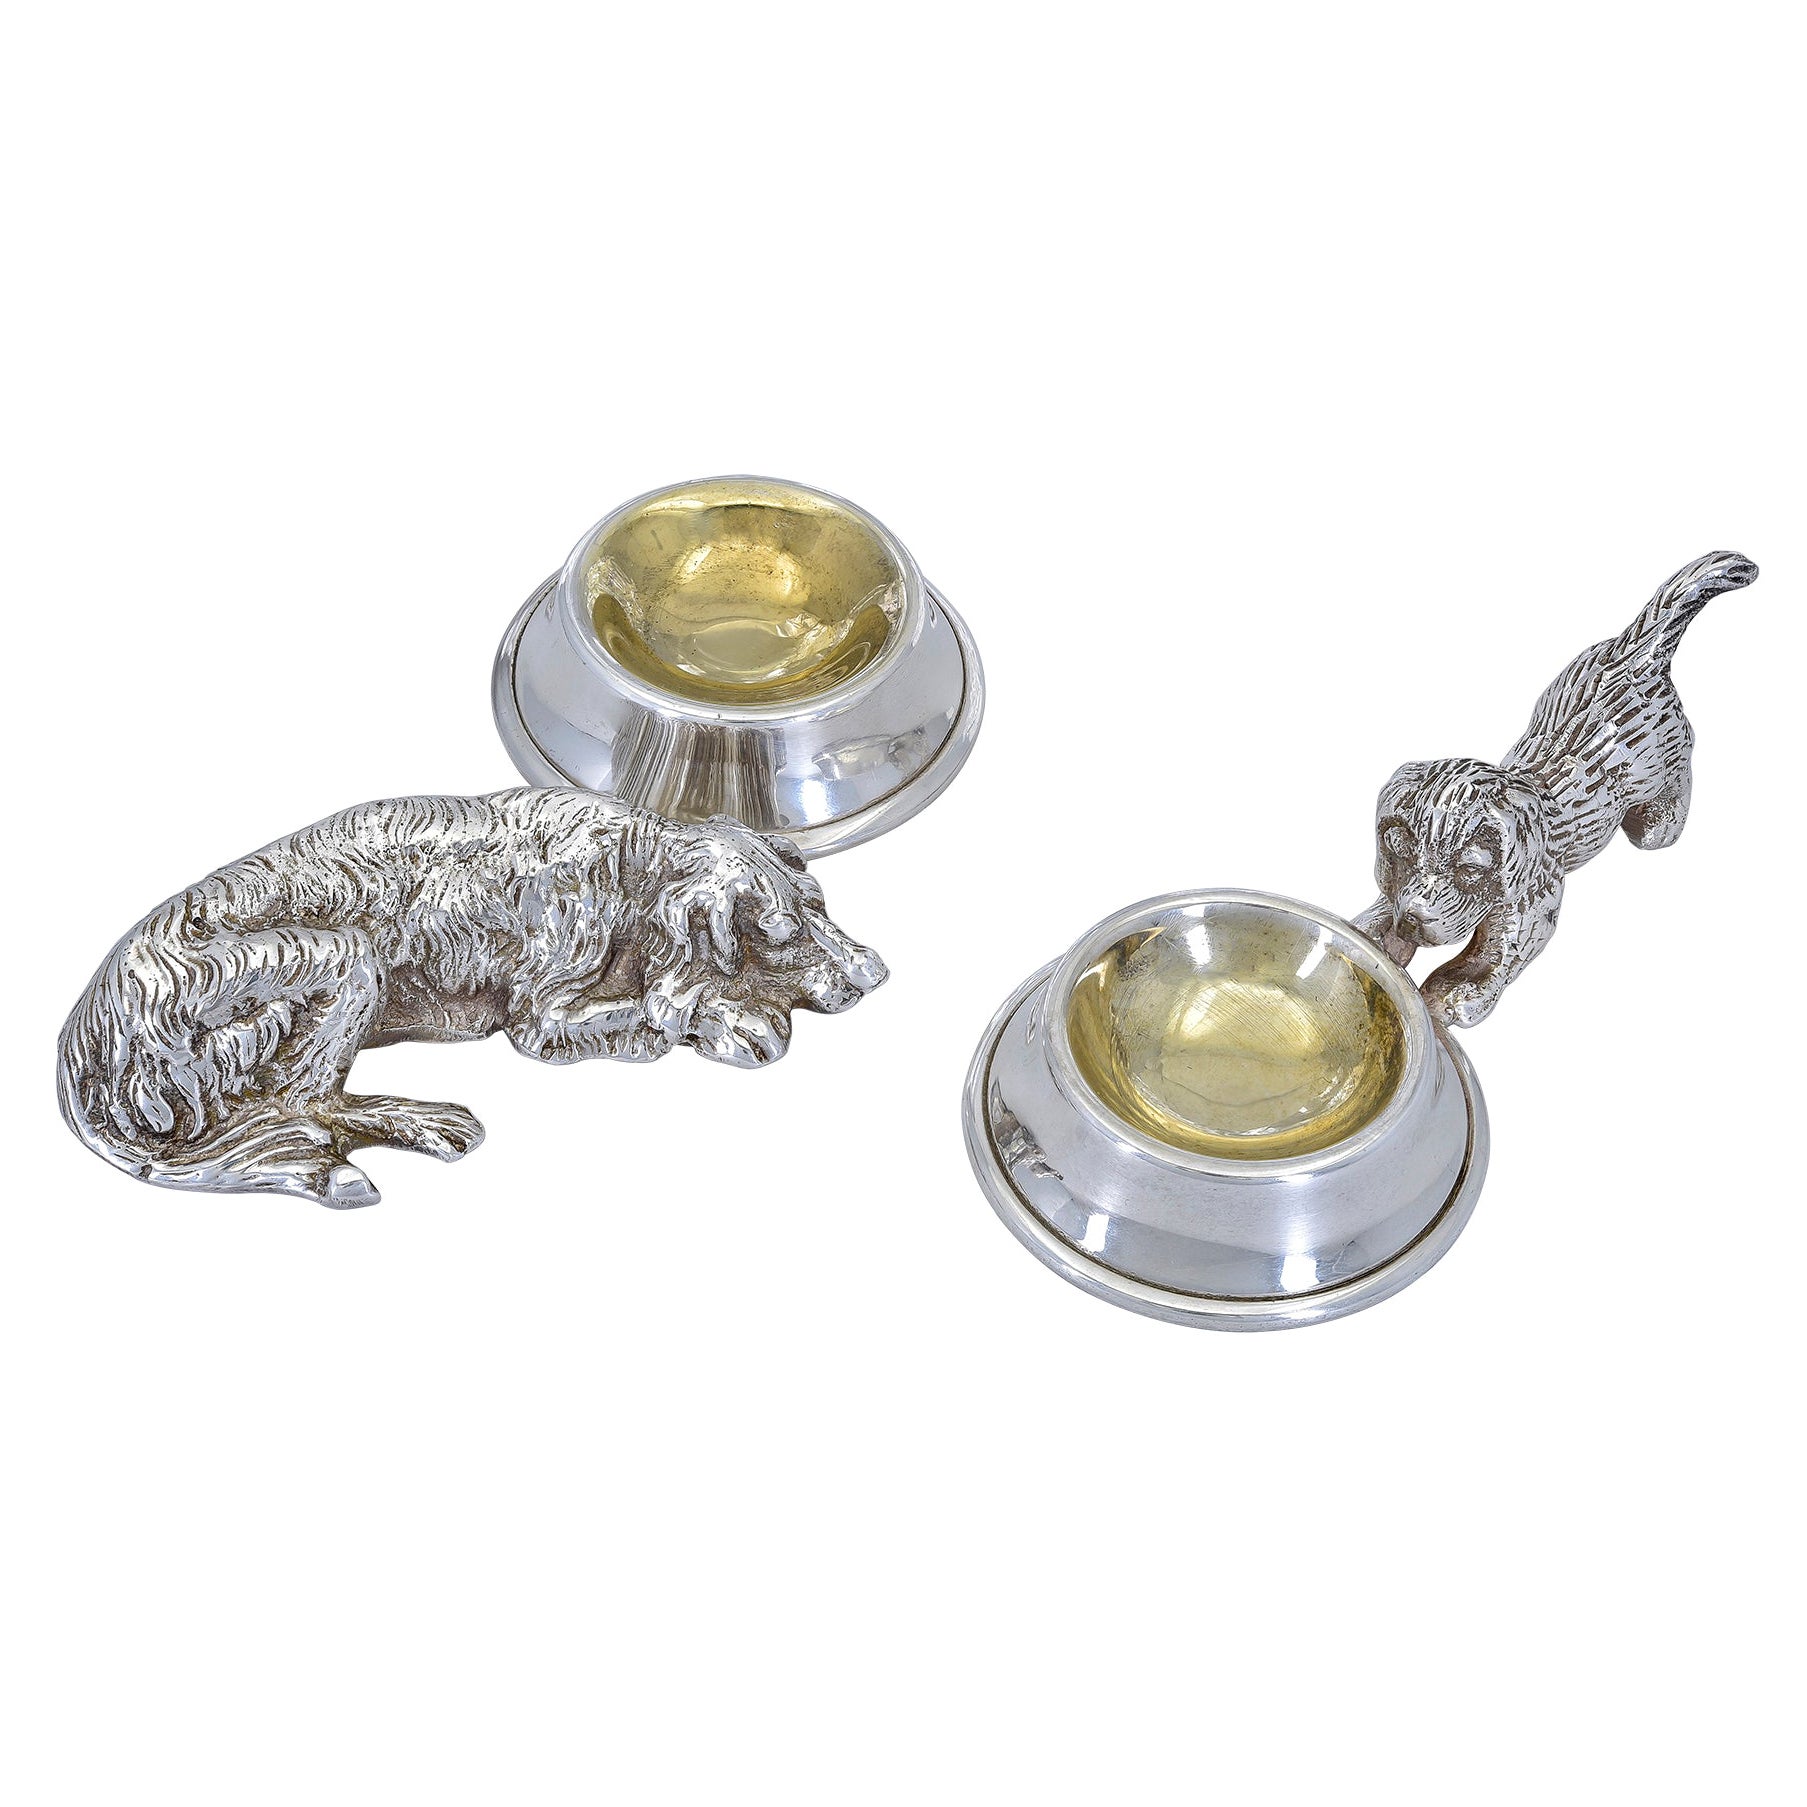 Two Figural Dogs with Gilded Bowls